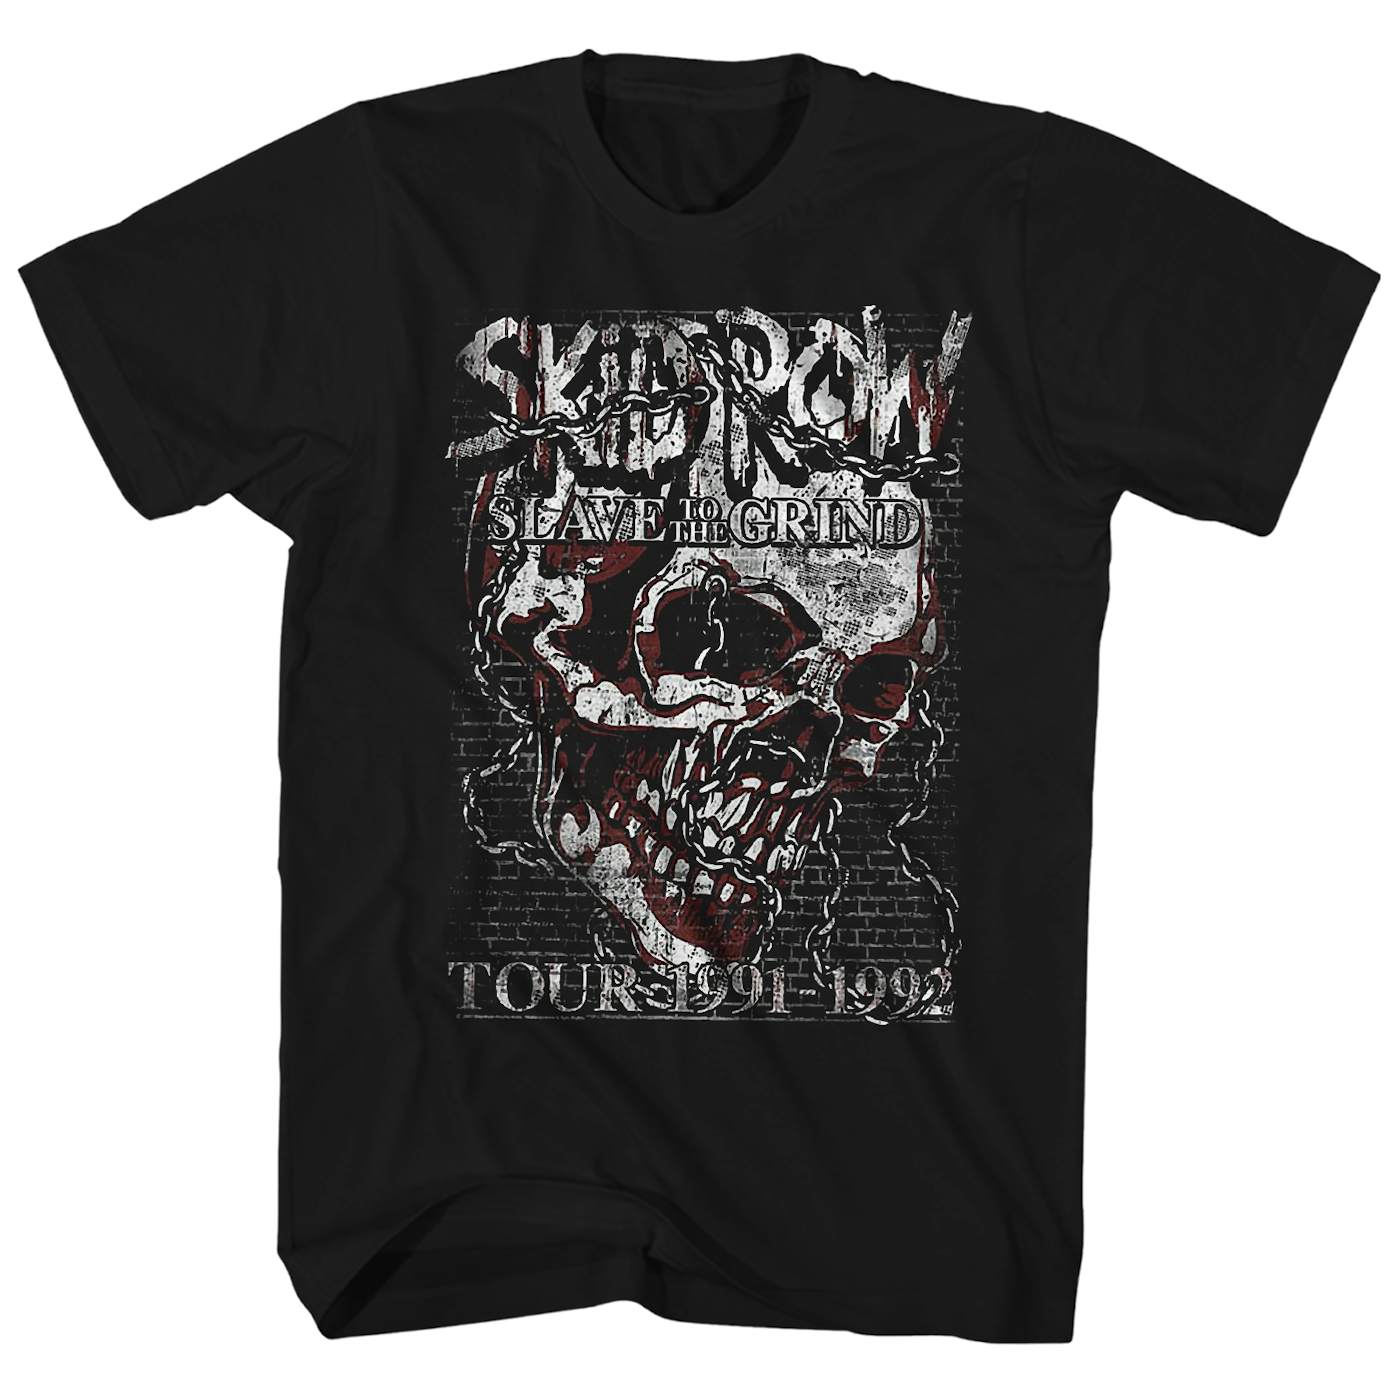 Skid Row T-Shirt | Slave To The Grind ’91 Tour Shirt (Reissue)